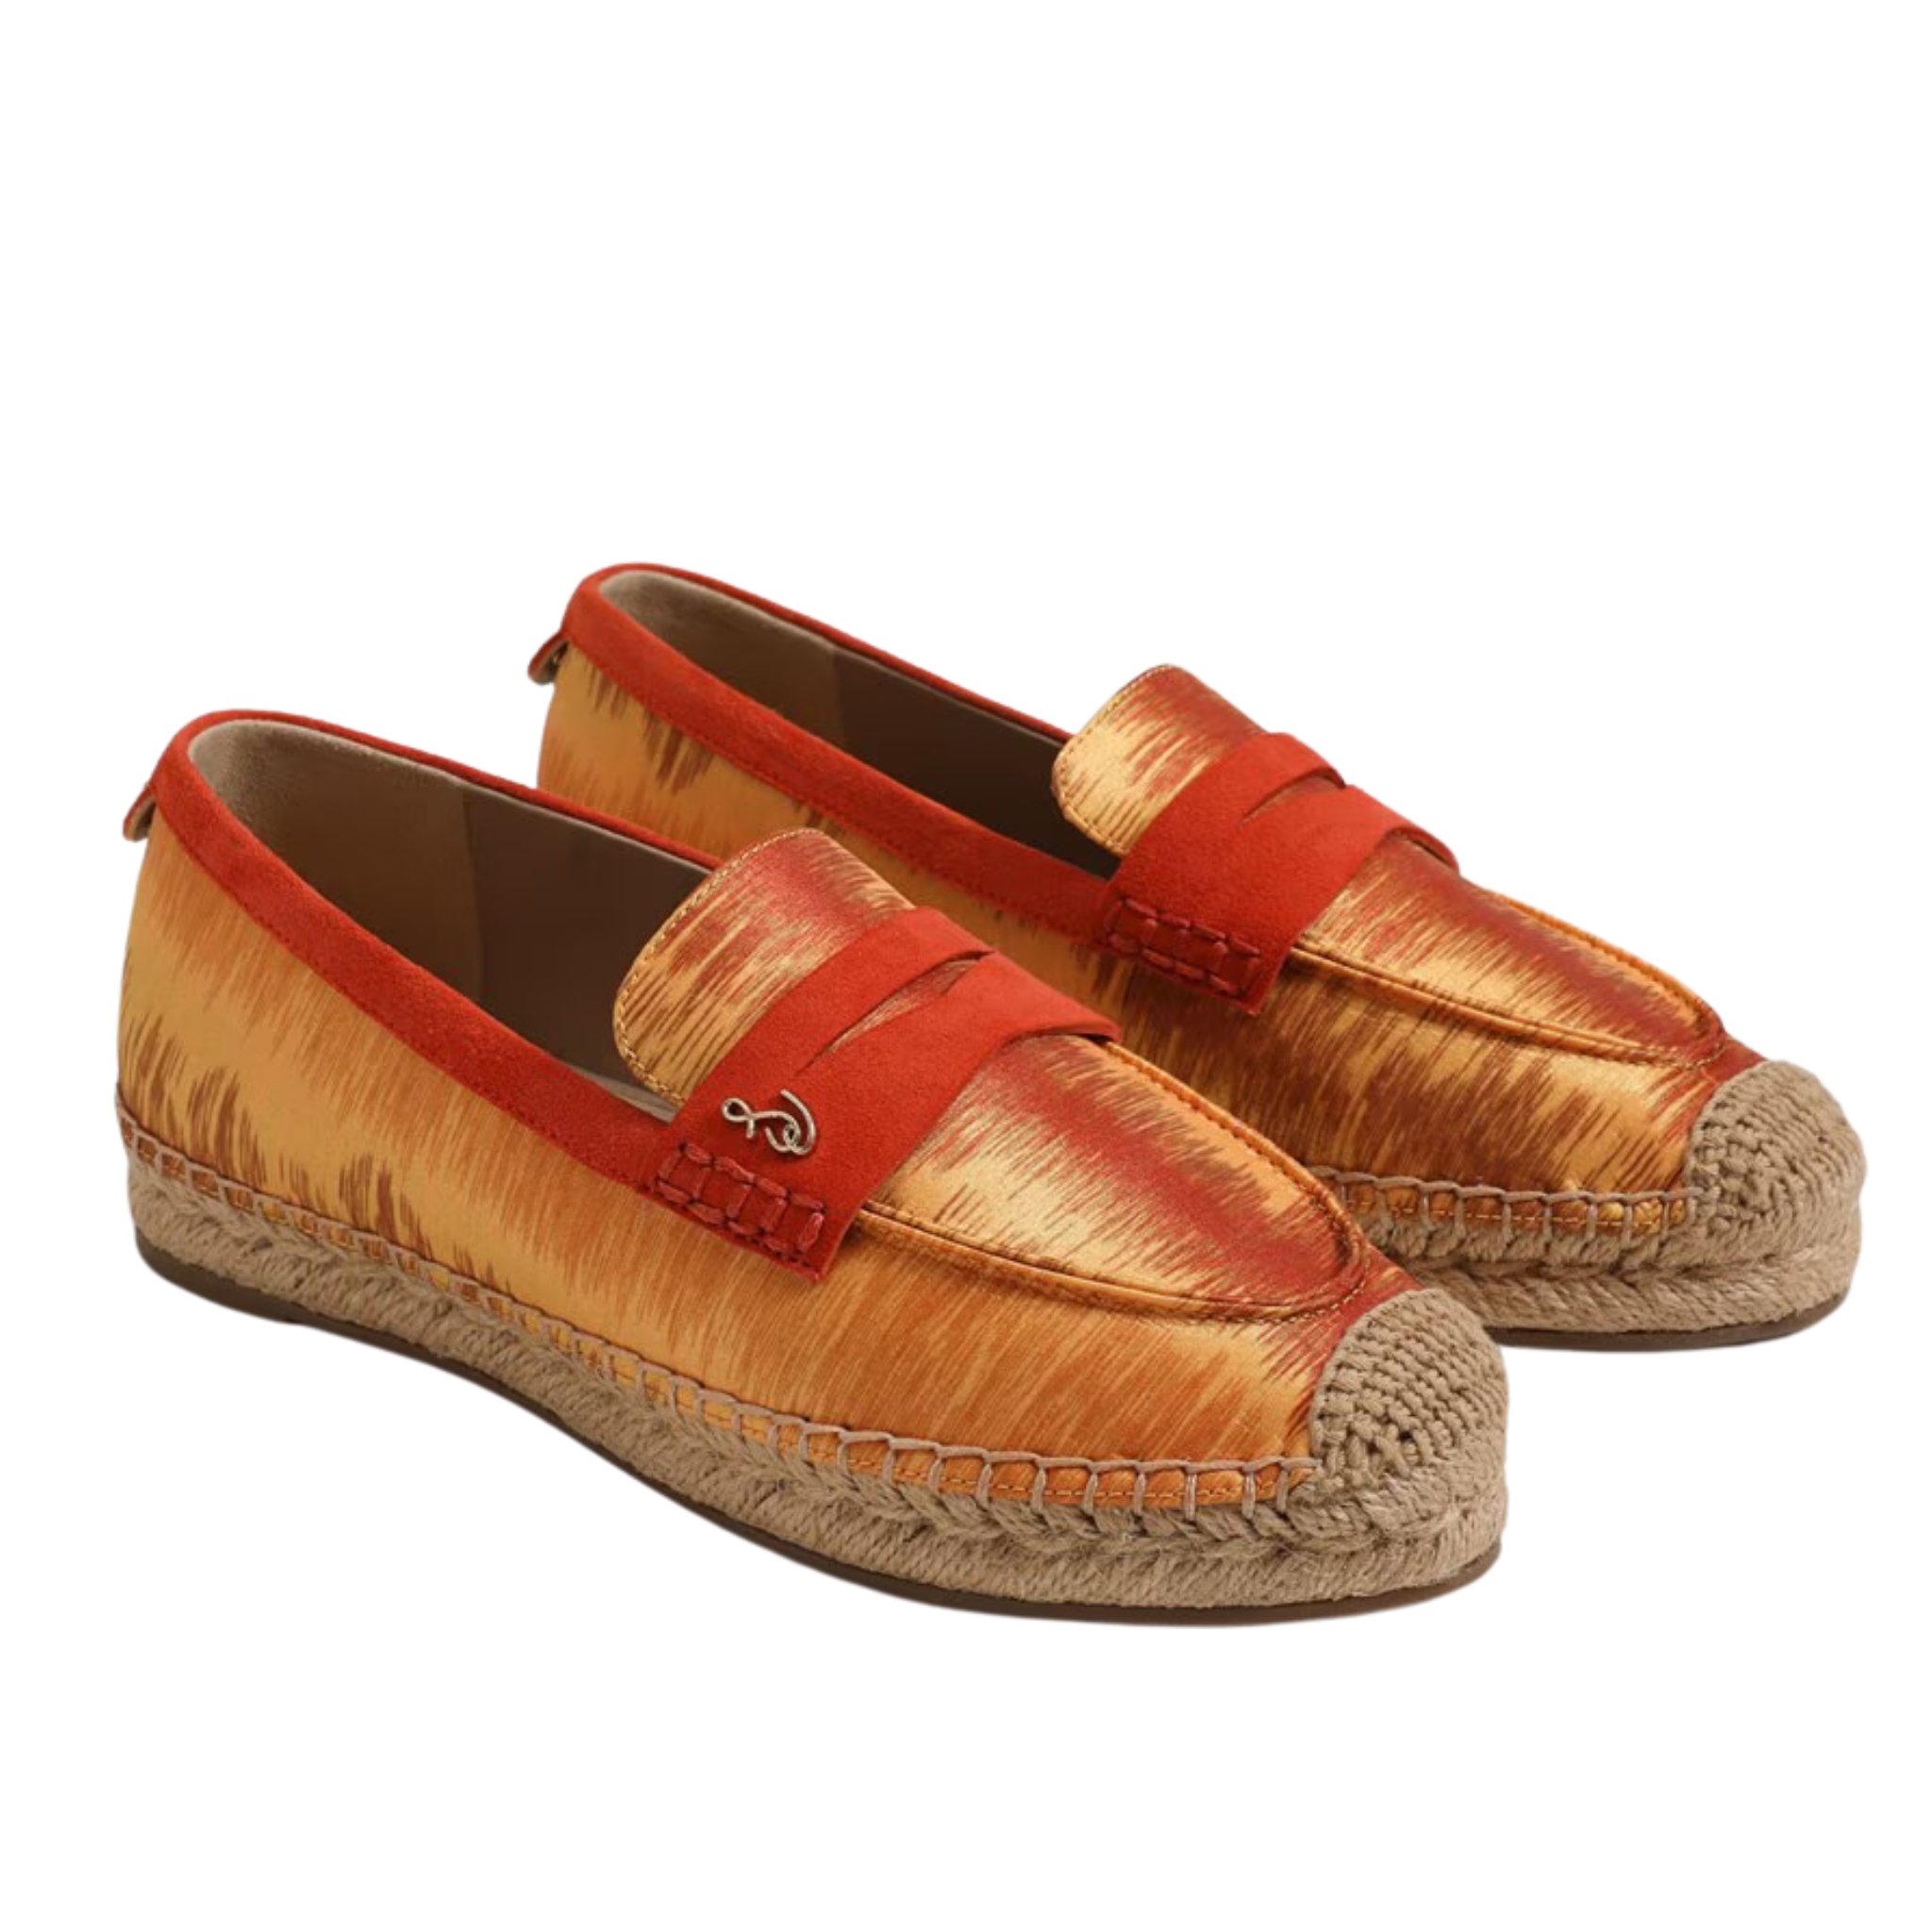 Save An Extra 20% Off Sam Edelman Shoes & Sneakers + Free Shipping